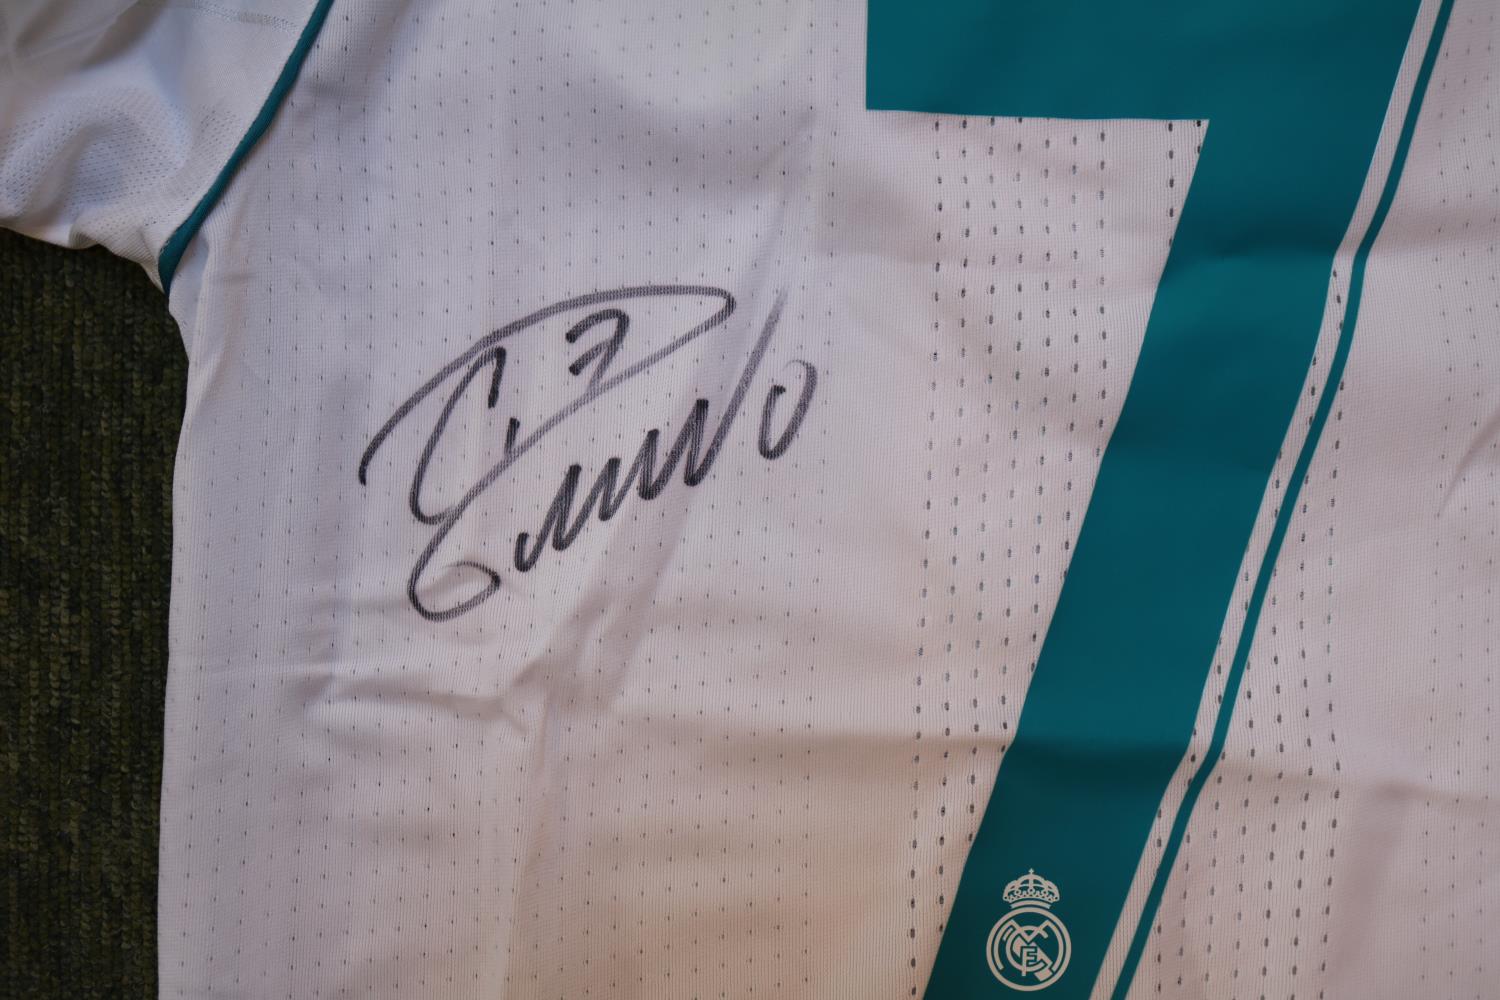 CRISTIANO RONALDO 2018 UEFA CHAMPIONS LEAGUE FINAL SIGNED REAL MADRID #7 JERSEY The jersey is - Image 4 of 5